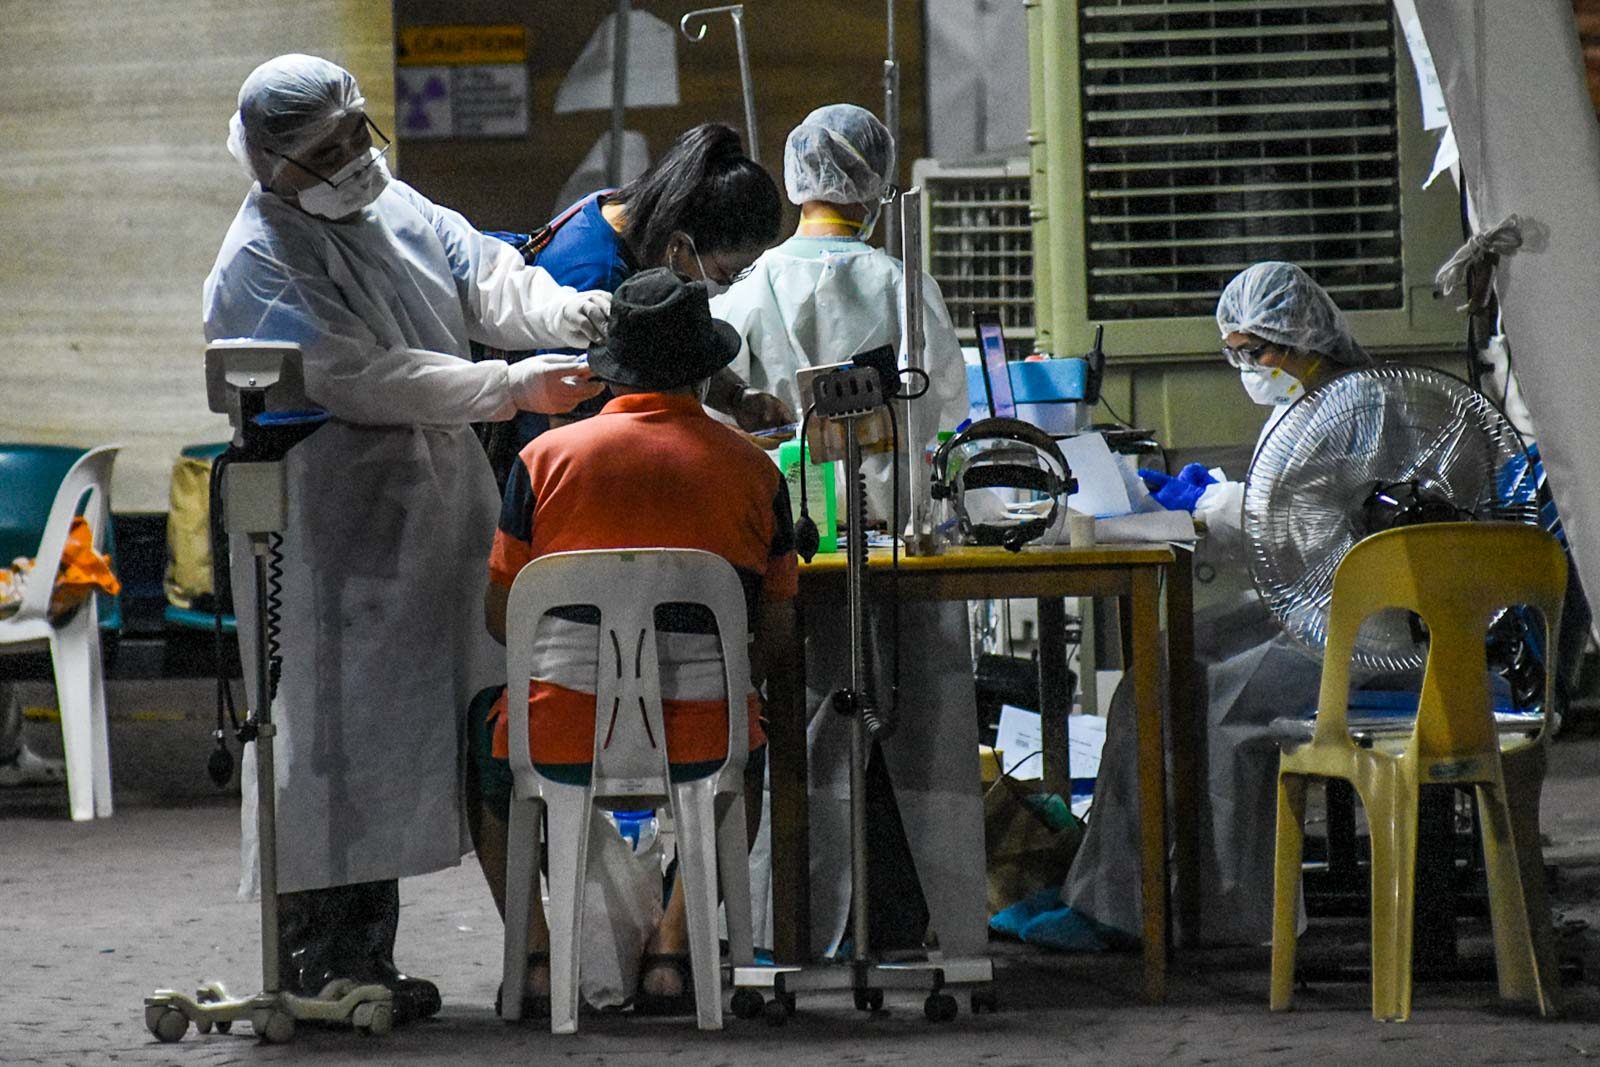 Metro Manila ICU capacity now ‘high-risk’ as COVID-19 surge continues